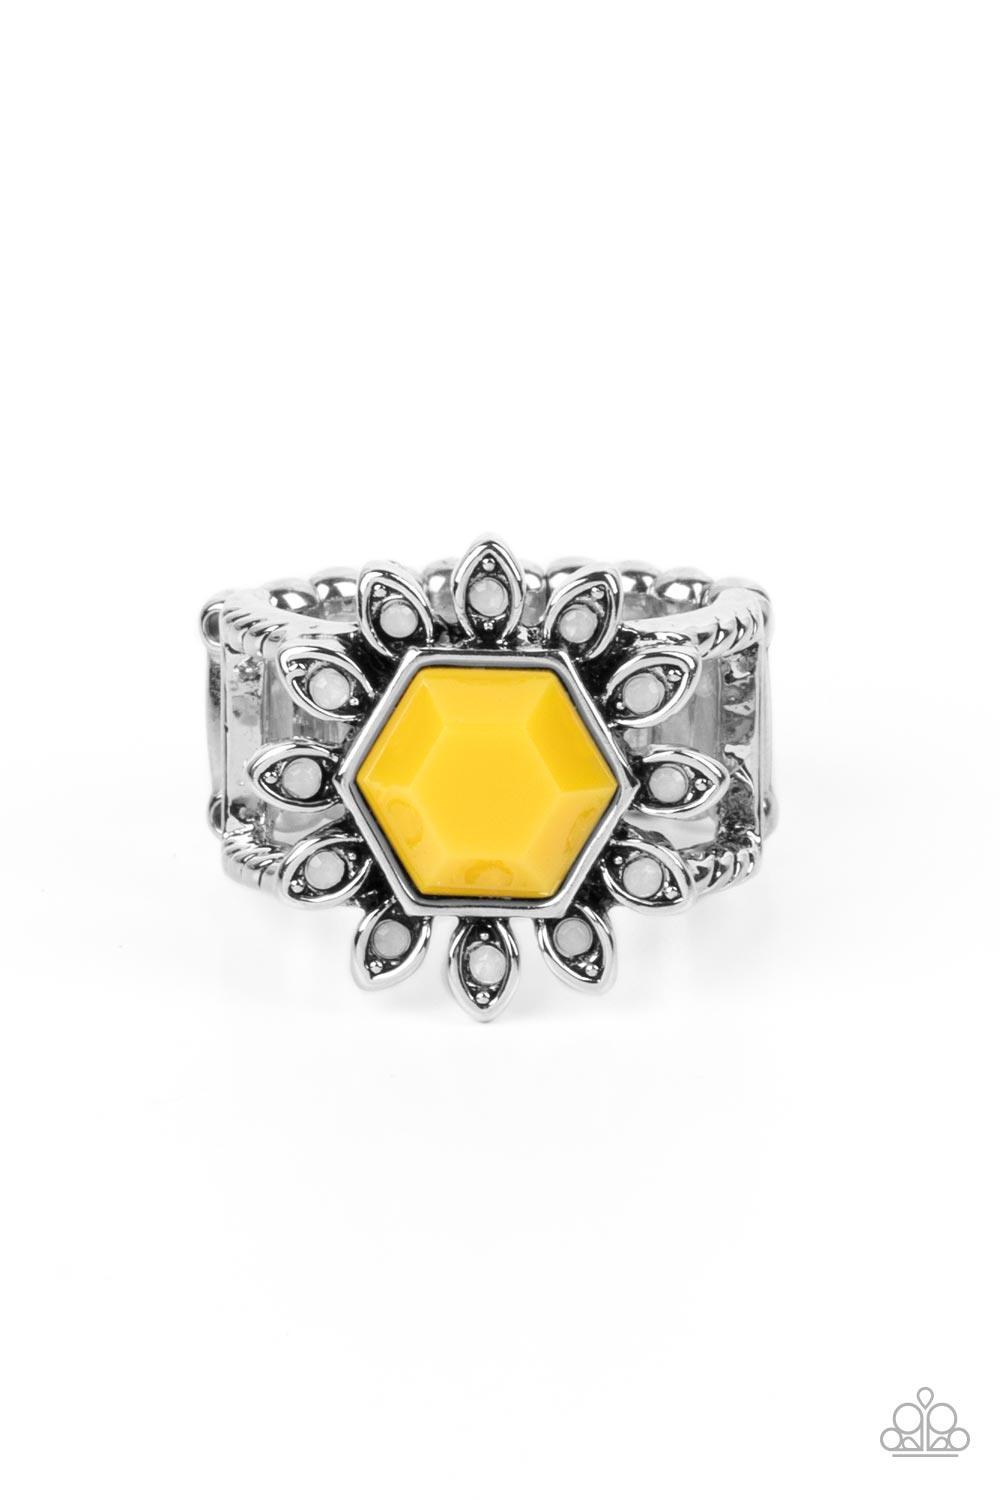 Wonderfully Wallflower - Yellow Ring - Paparazzi Accessories - A hexagon-shaped Samoan Sun bead is pressed into the center of an antiqued silver frame. Dainty silver petals dotted with white opalescent centers radiate around the defaced bead creating a whimsical allure atop a braided layered band.